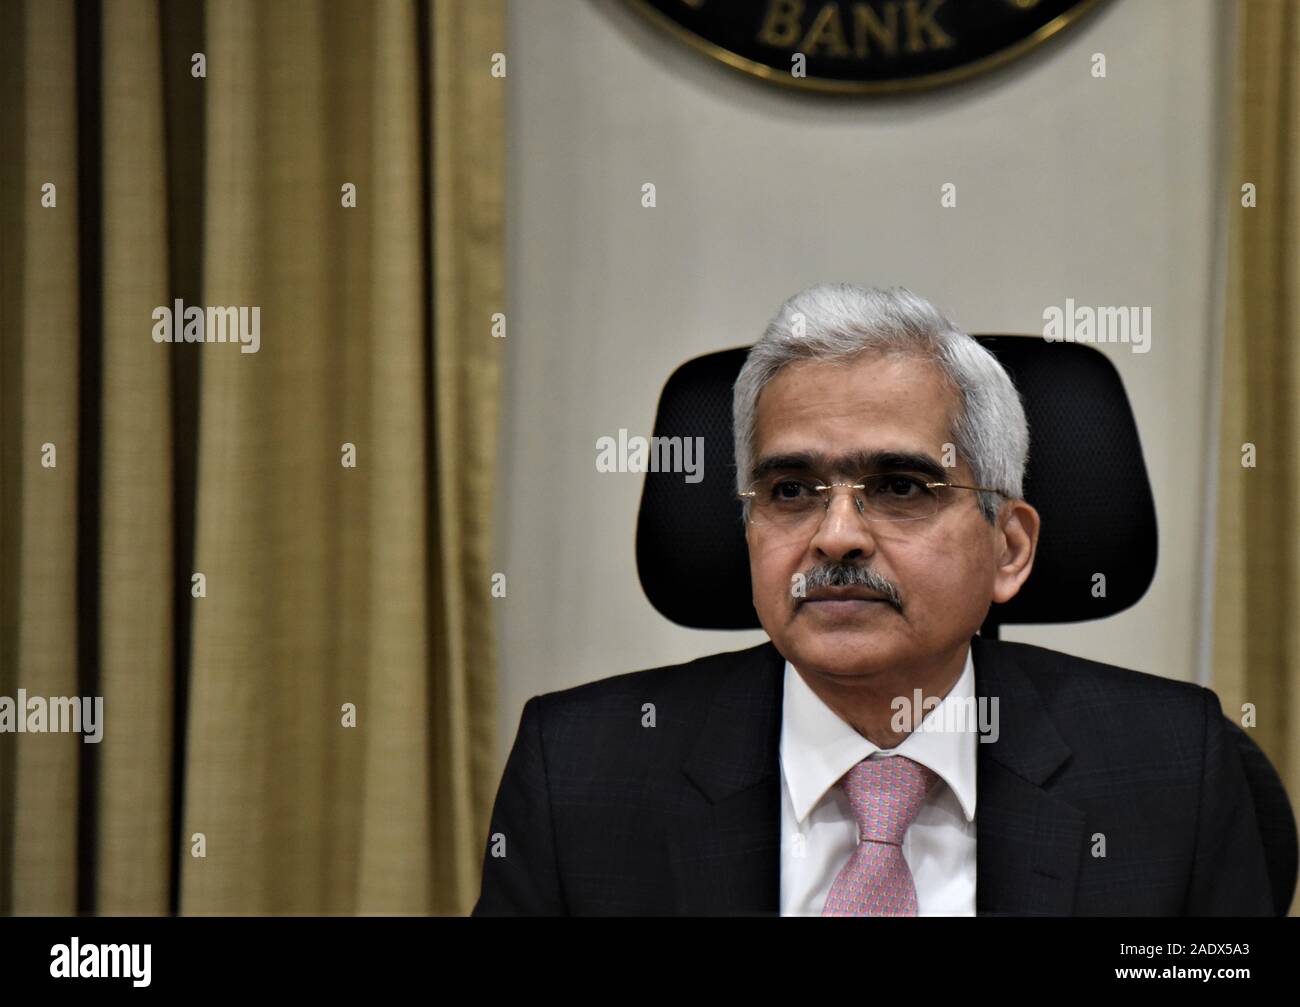 Mumbai, India. 5th Dec, 2019. Shaktikanta Das, governor of the Reserve Bank of India (RBI), attends a press conference at the RBI head office in Mumbai, India, Dec. 5, 2019. India's Central Bank announced to maintain the repo rate unchanged at 5.15 percent on Thursday, giving priority to control inflation rather than the diminishing growth in Asia's third largest economy. The statement was made after the country's Reserve Bank of India's Monetary Policy Committee (MPC) concluded its two-day meeting on Thursday. Credit: Fariha Farooqui/Xinhua/Alamy Live News Stock Photo